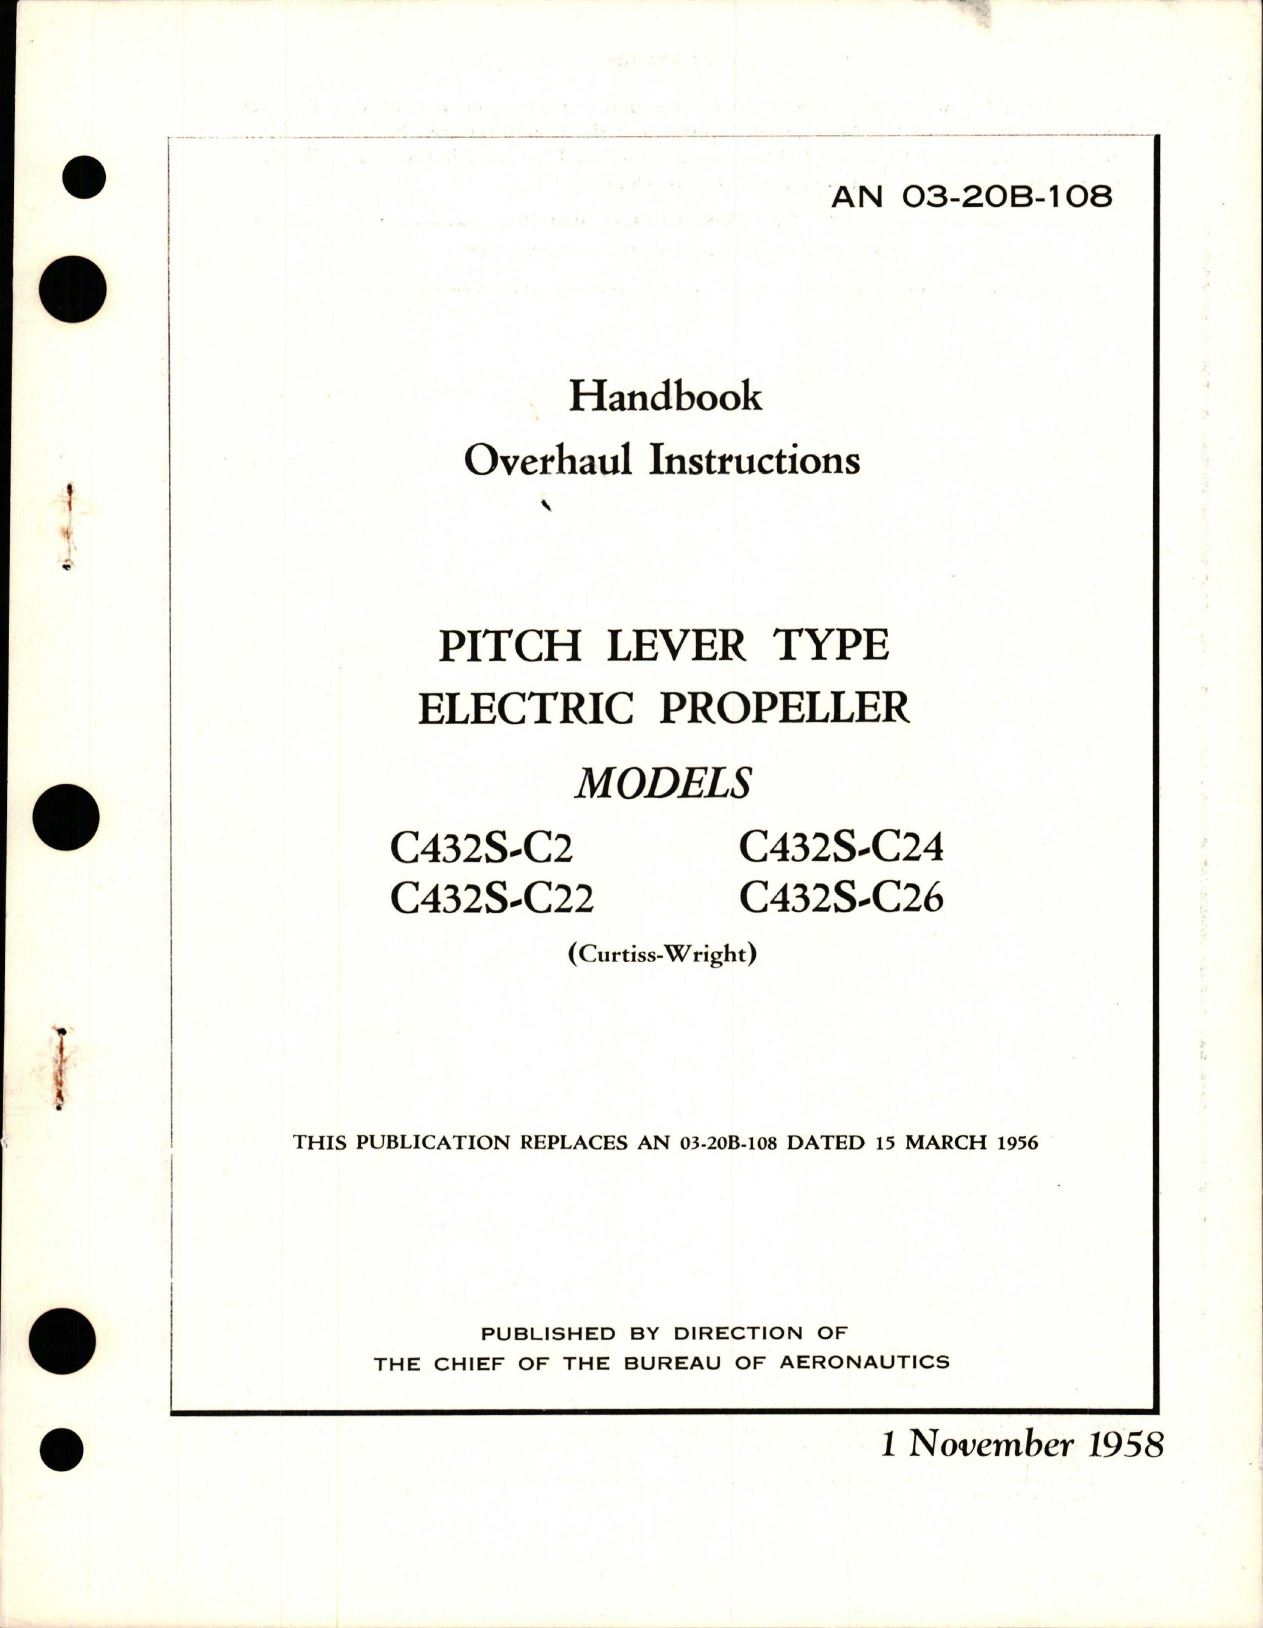 Sample page 1 from AirCorps Library document: Overhaul Instructions for Pitch Lever Type Electric Propeller - Models C432S-C2, C432S-C22, C432S-C24, C432S-C-26 